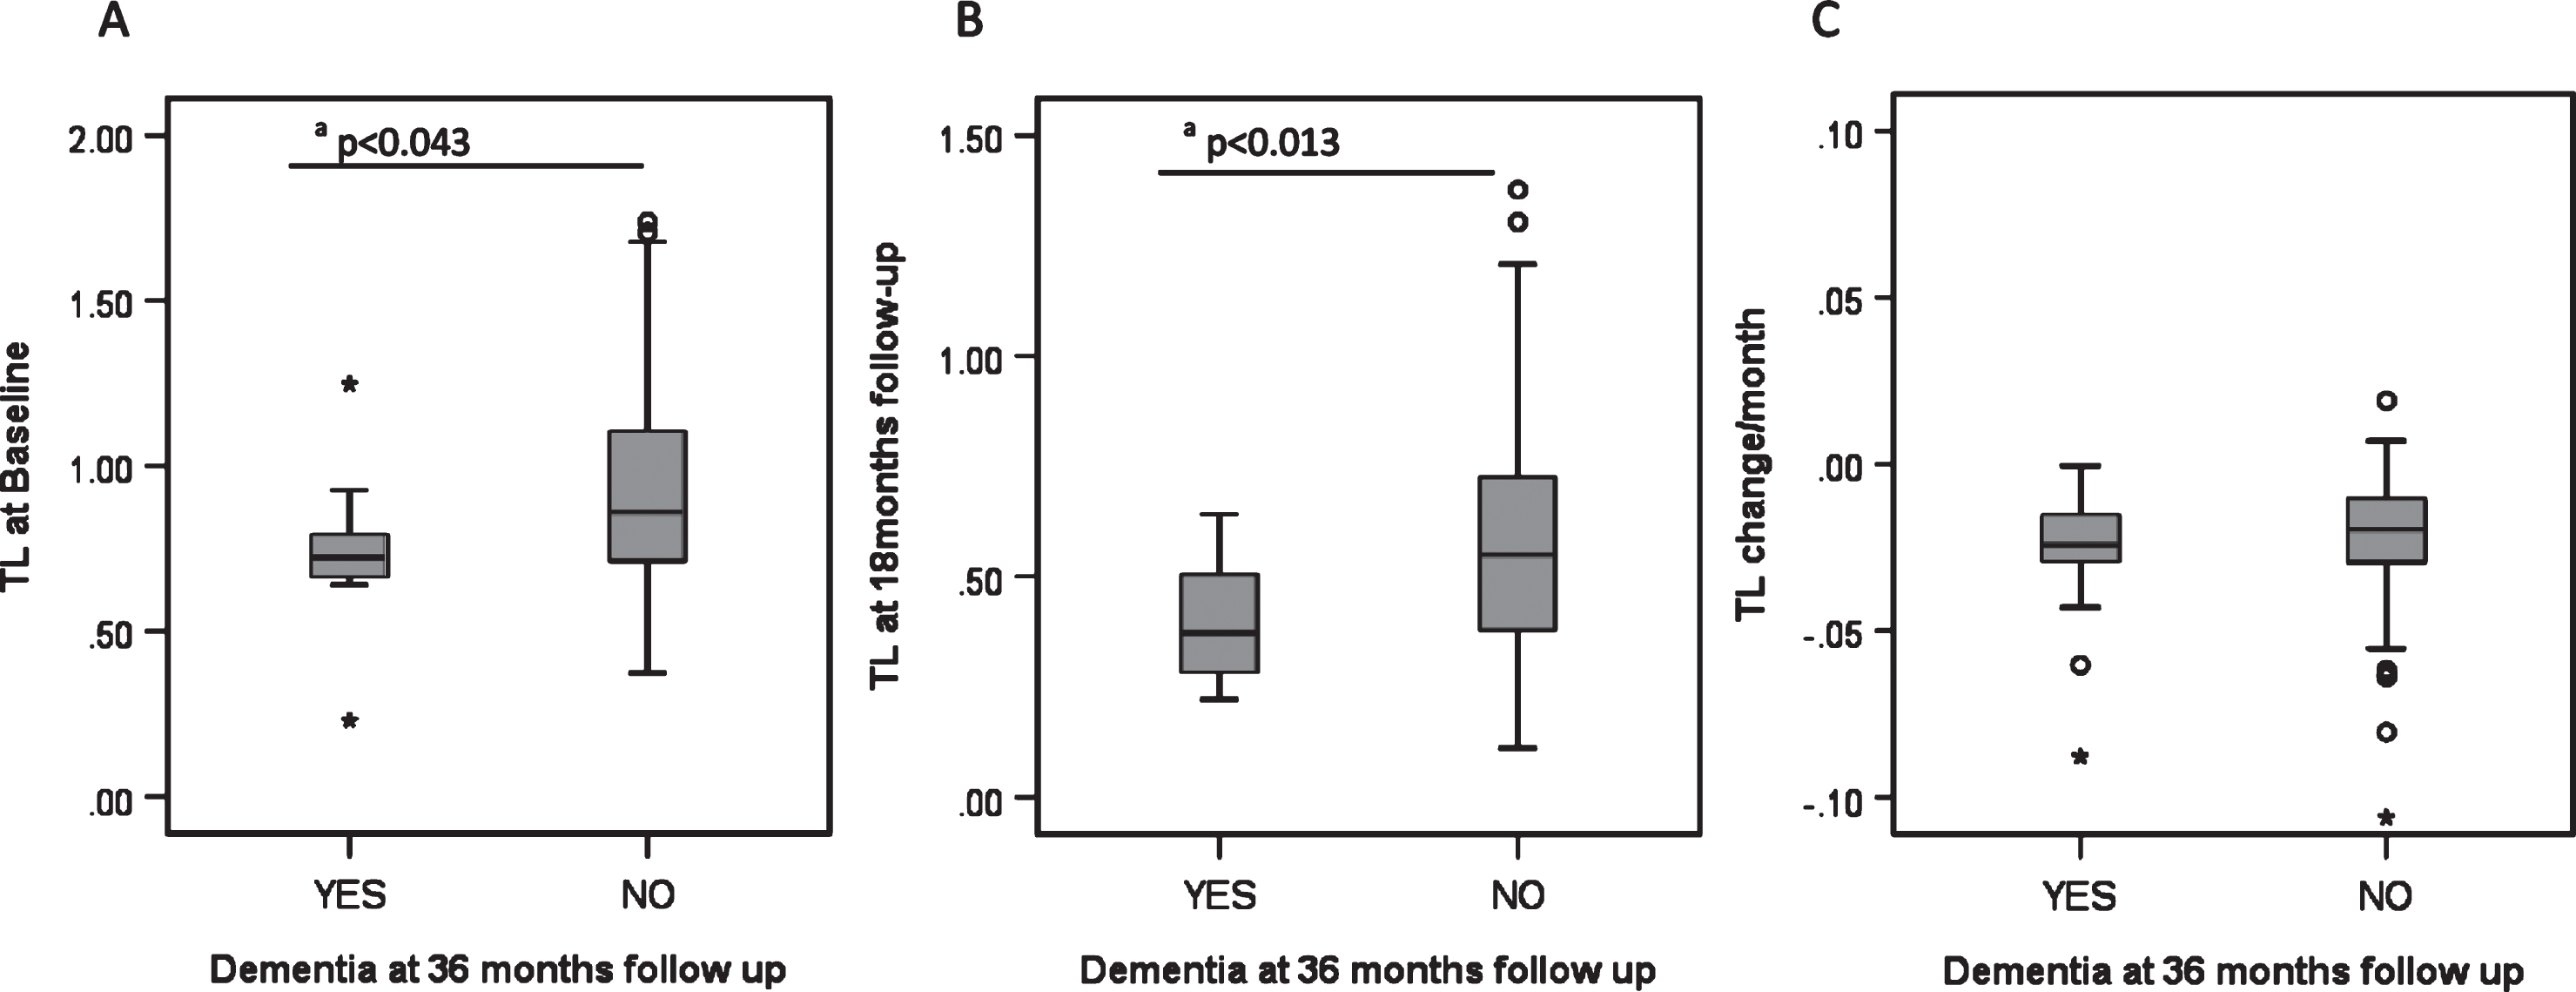 Biomarkers and development of dementia in PD. A) Telomere length at baseline and its relationship to PD dementia at 36 months. B) Telomere length at 18 month follow-up and its relationship to PD dementia at 36 months. C) Telomere length shortening per month and its relationship to PD dementia at 36 months. Each category box plot includes the median (—), the range of data within the first and third quartiles (box), the range of data within the first and ninth deciles (whiskers) and the outliers falling outside the latter (° = Outlier, * = Extreme Outlier). aStatistically significant using the Mann-Whitney U Test.